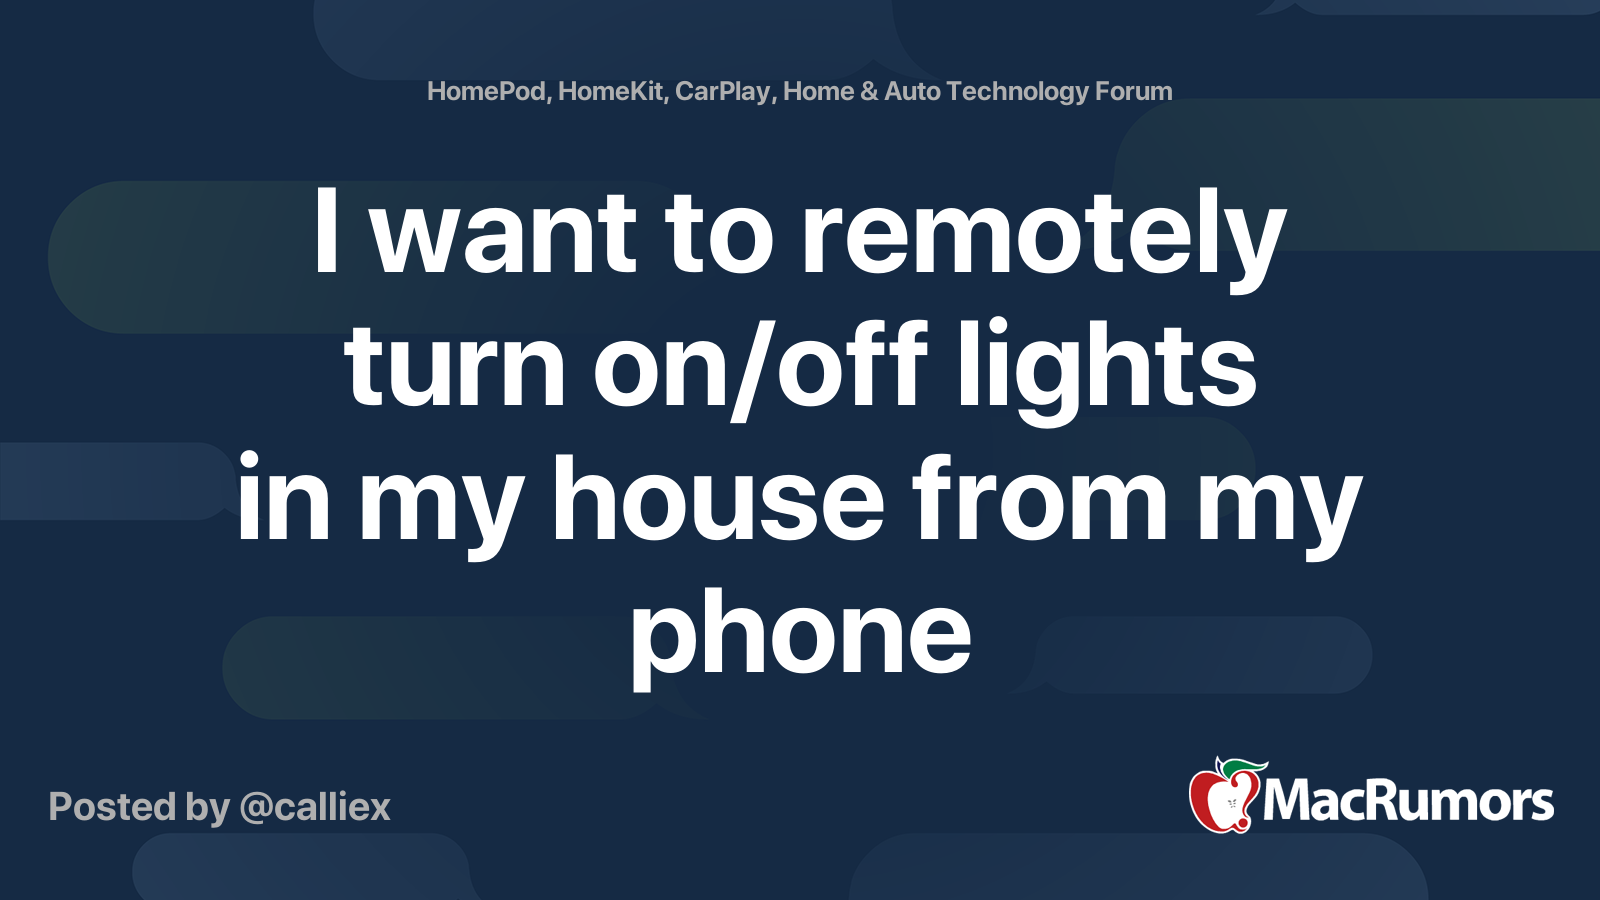 I want to remotely turn on/off lights in my house from my phone